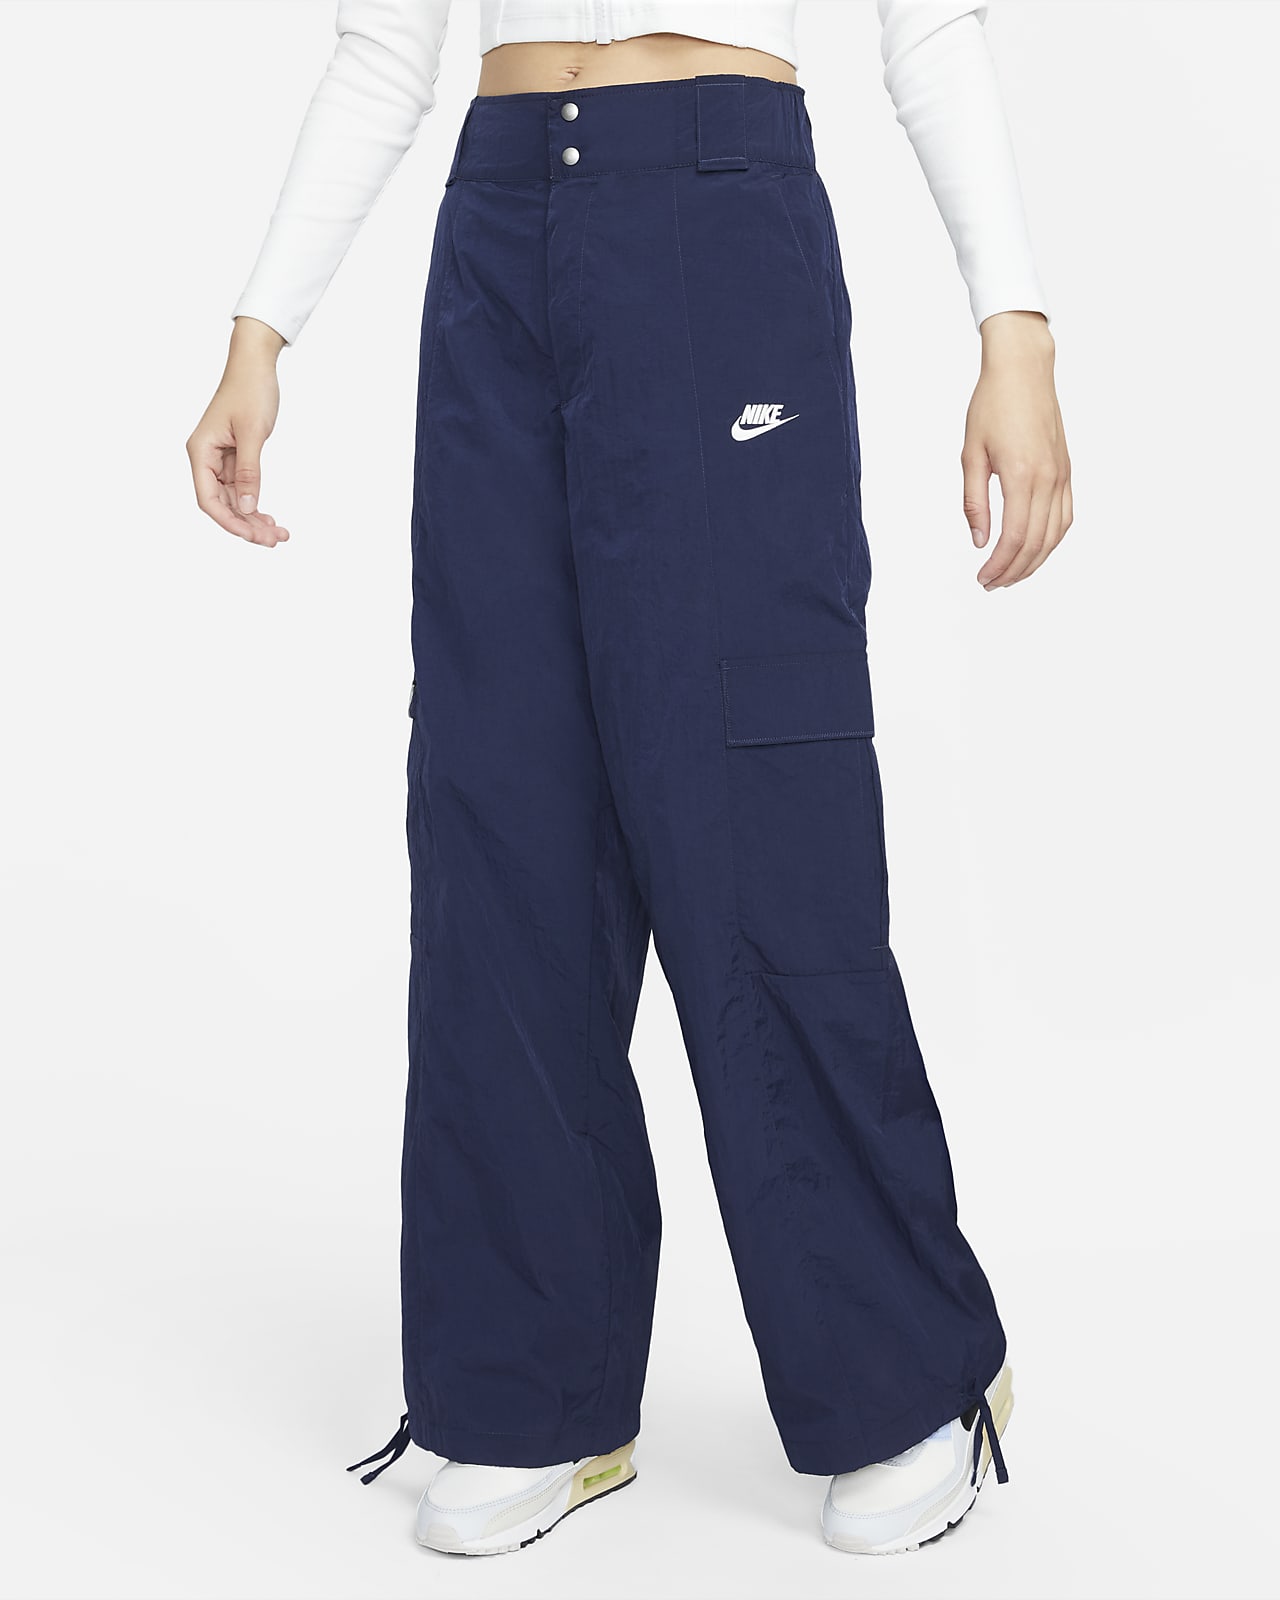 Wide Waistband Clothing. Nike IN